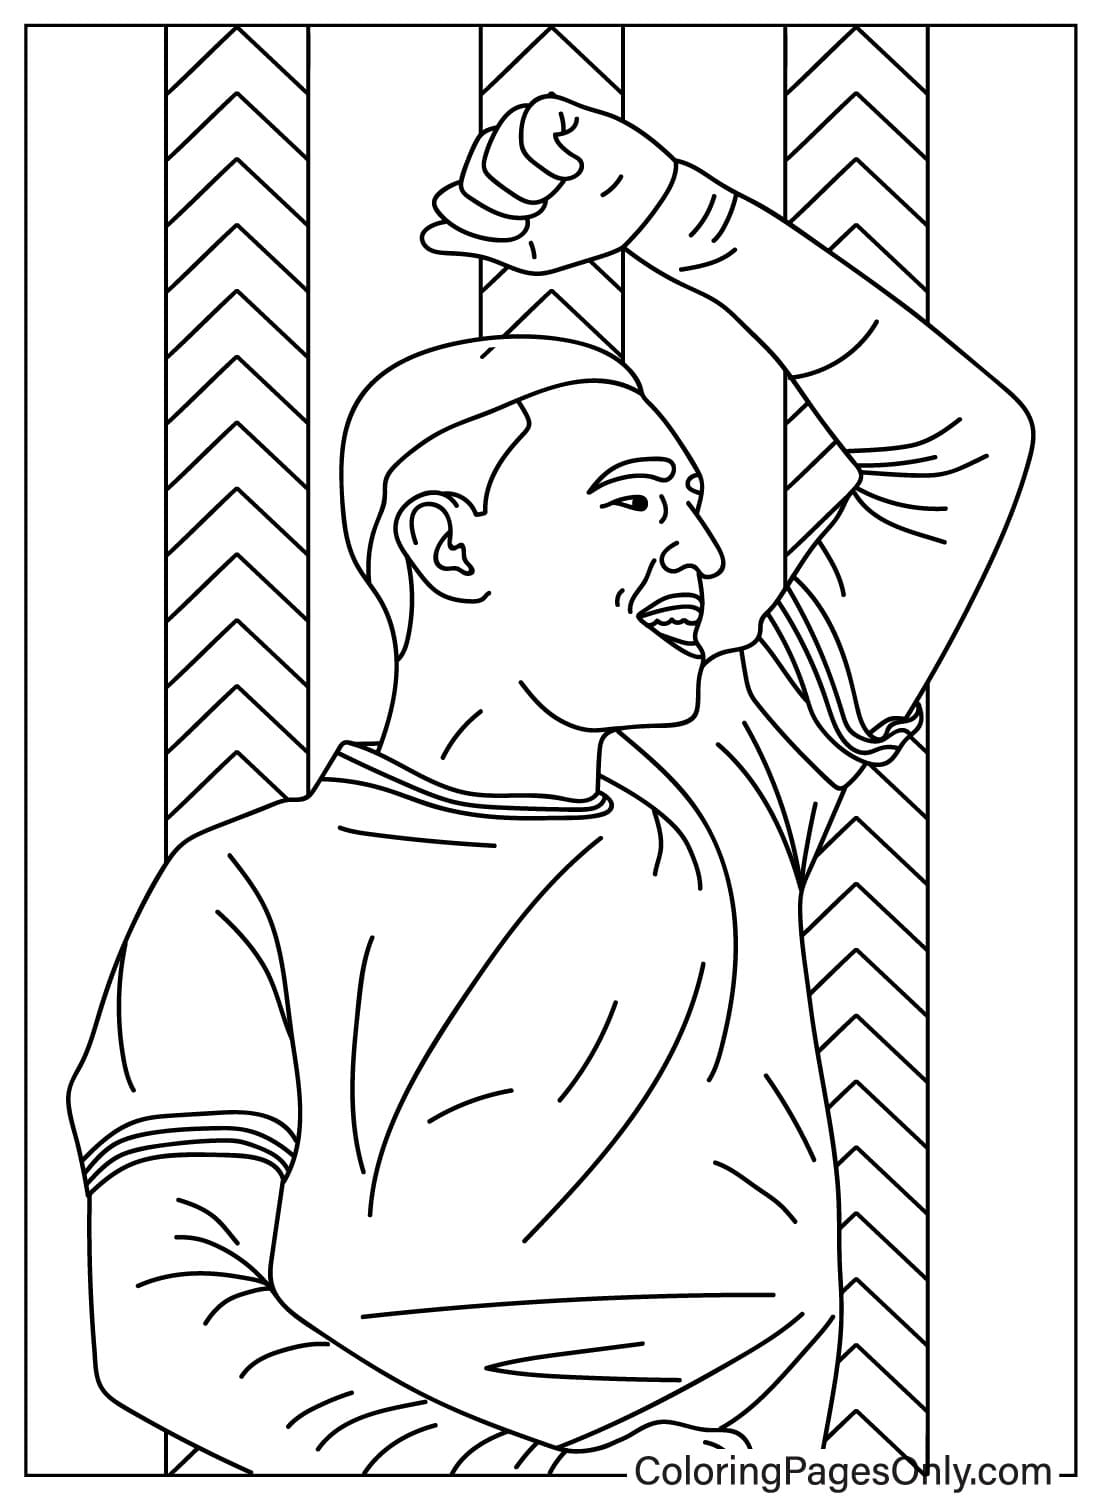 Phil Foden Coloring Page from Phil Foden